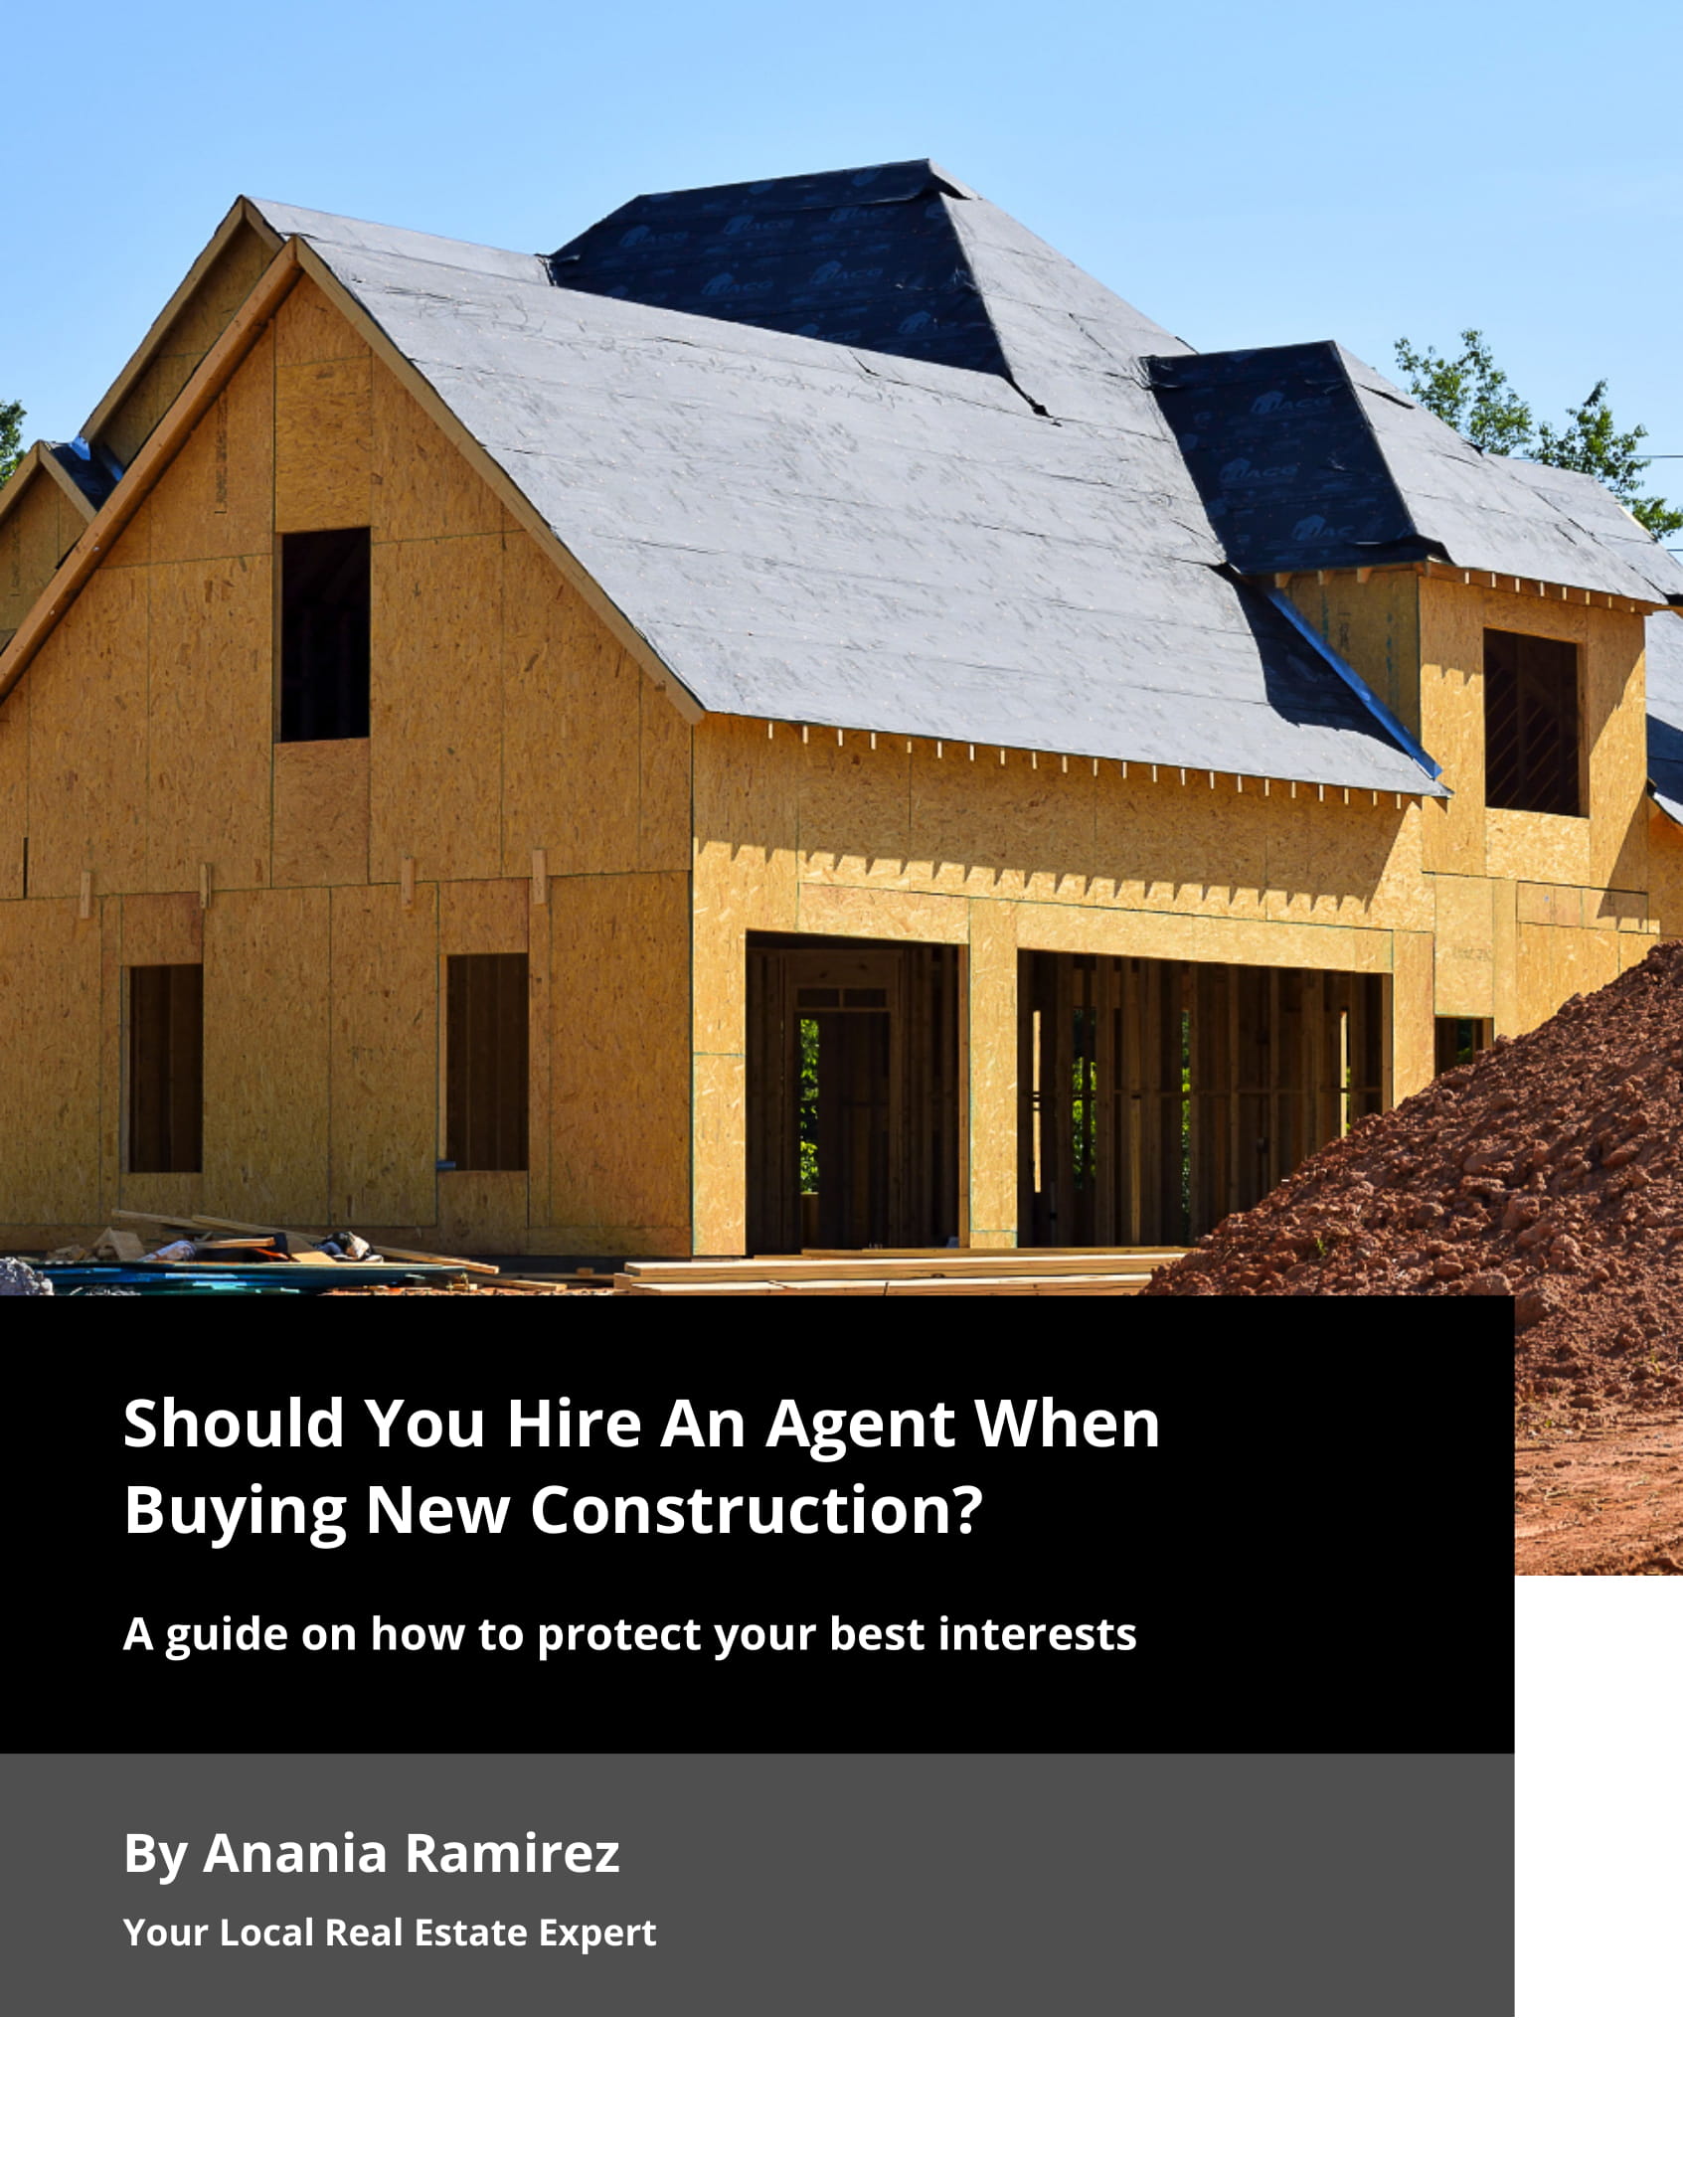 New Home Construction Buyers Guide